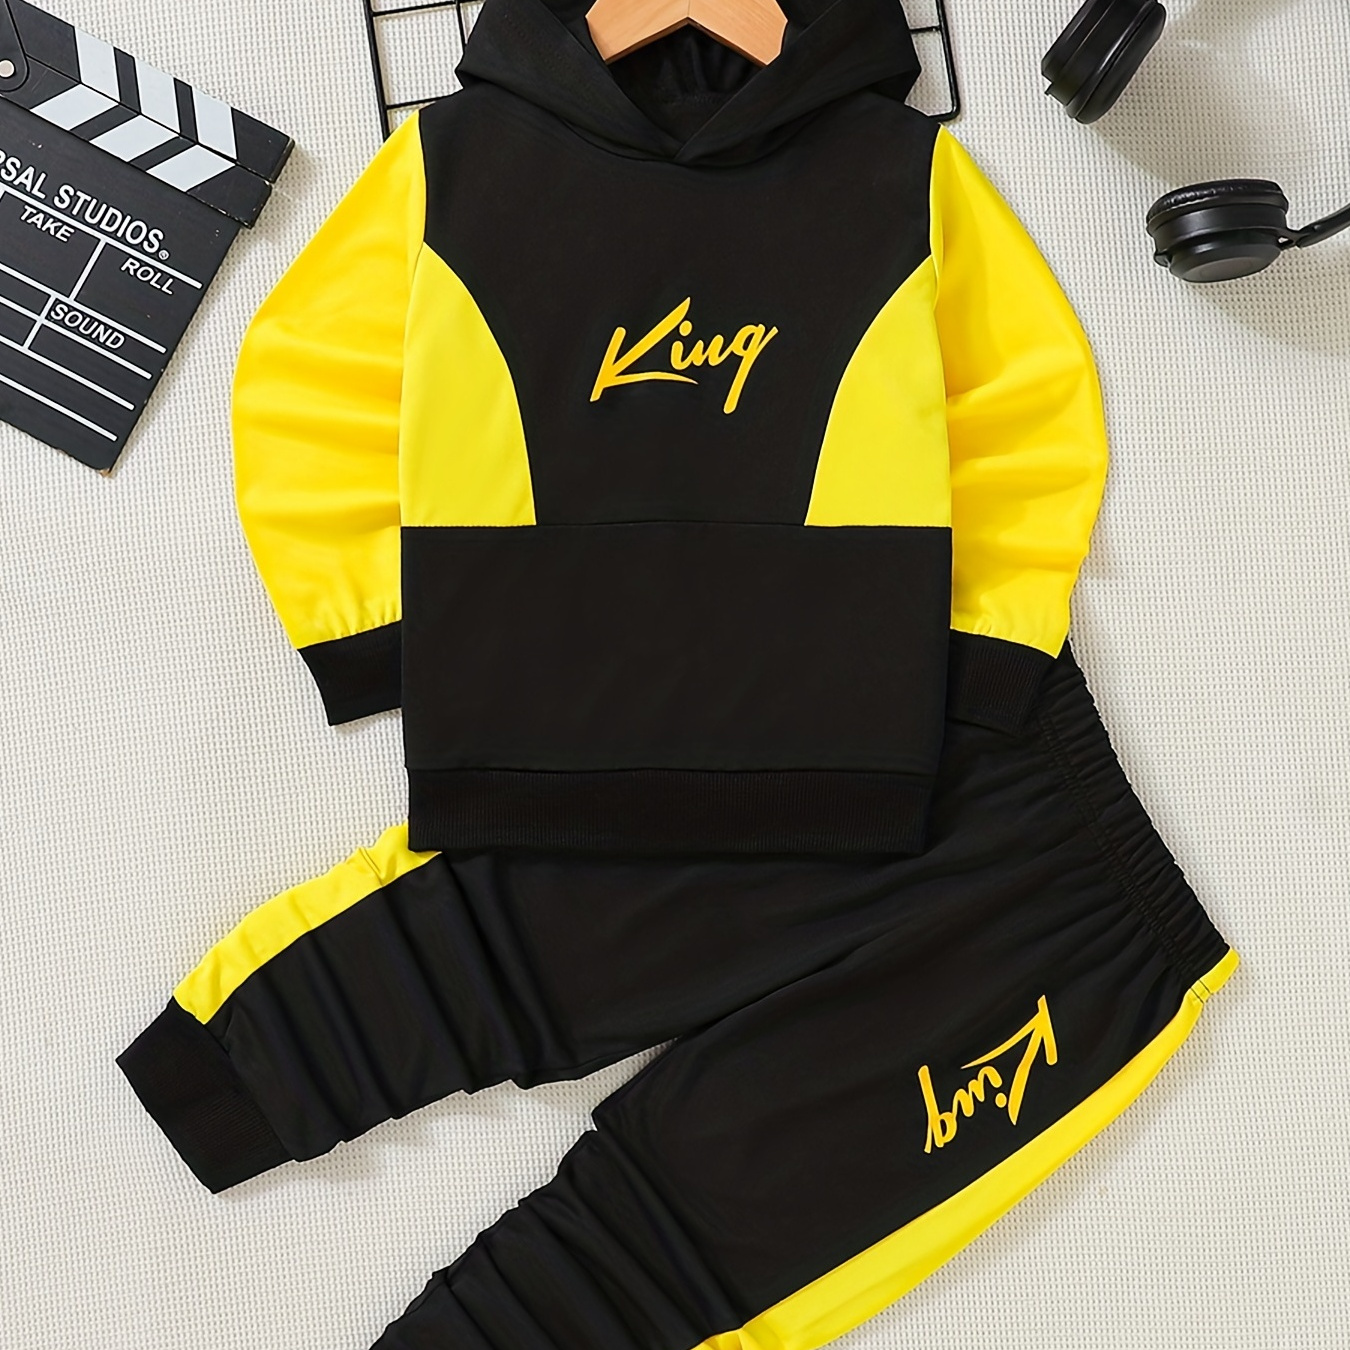 

2pcs Boy's Color Clash Outfit, King Print Hoodie Top & Sweatpants Set, Casual Long Sleeve Top, Kid's Clothes For Spring Fall